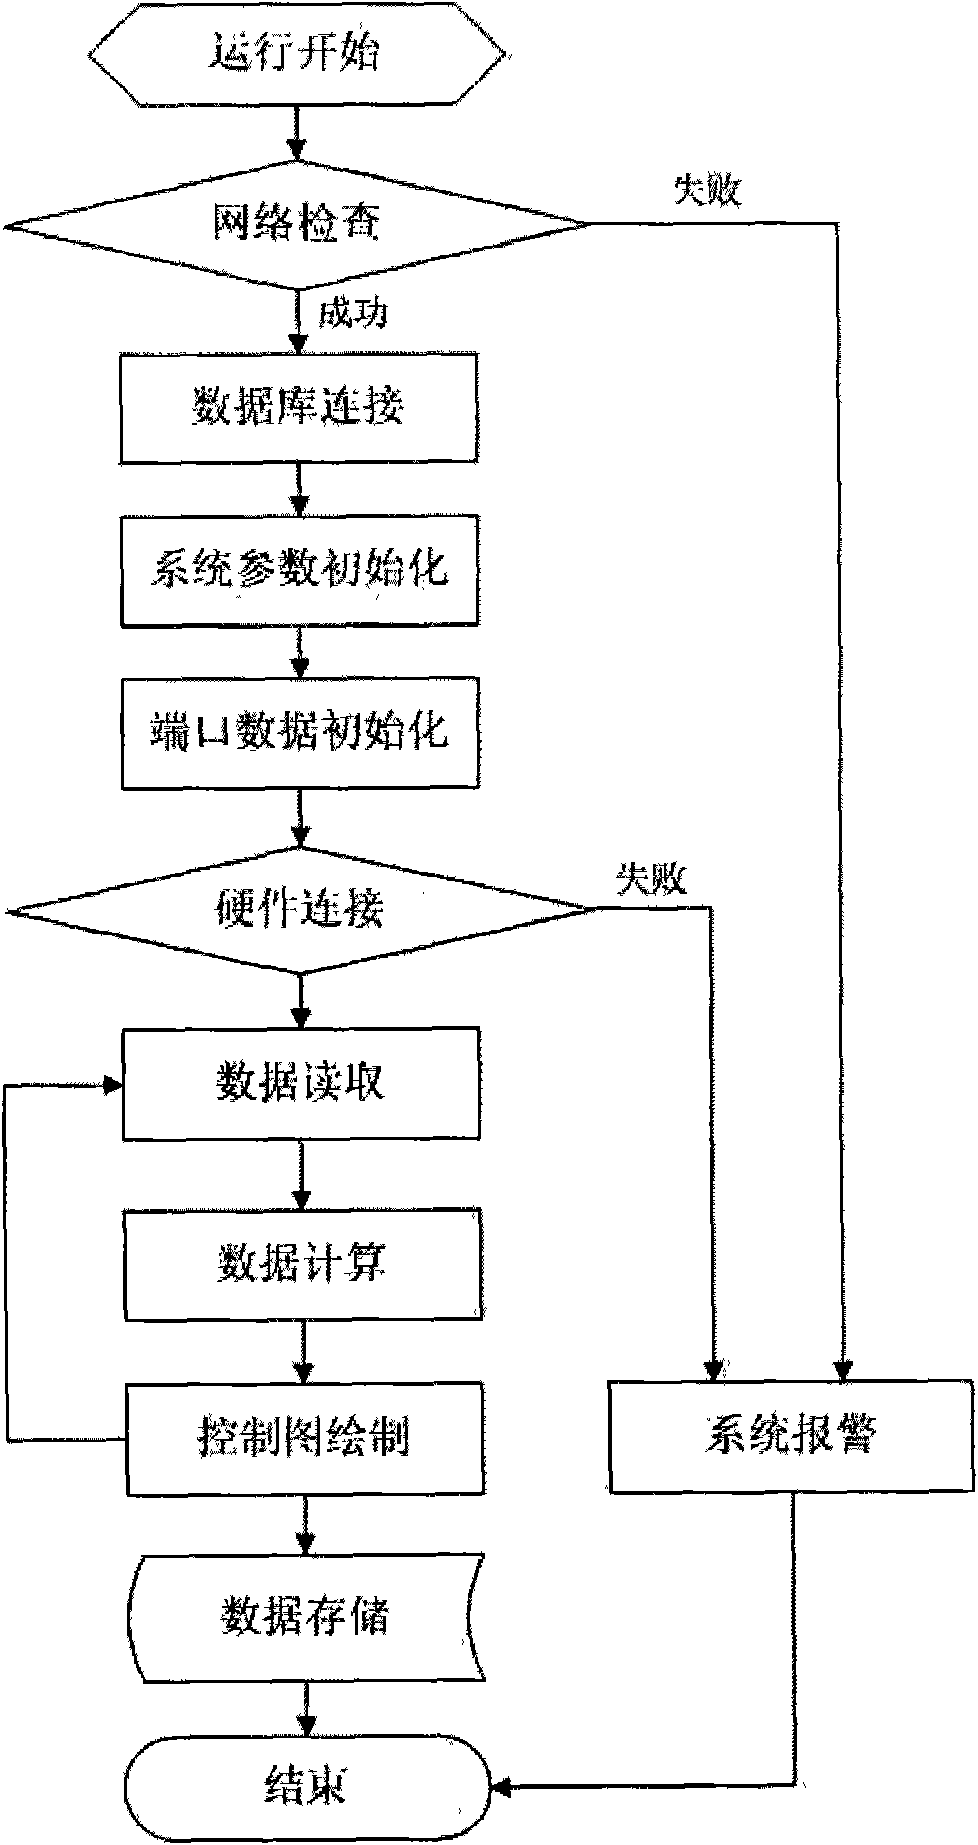 Online monitoring system and monitoring method of oilless bushing sintering production line